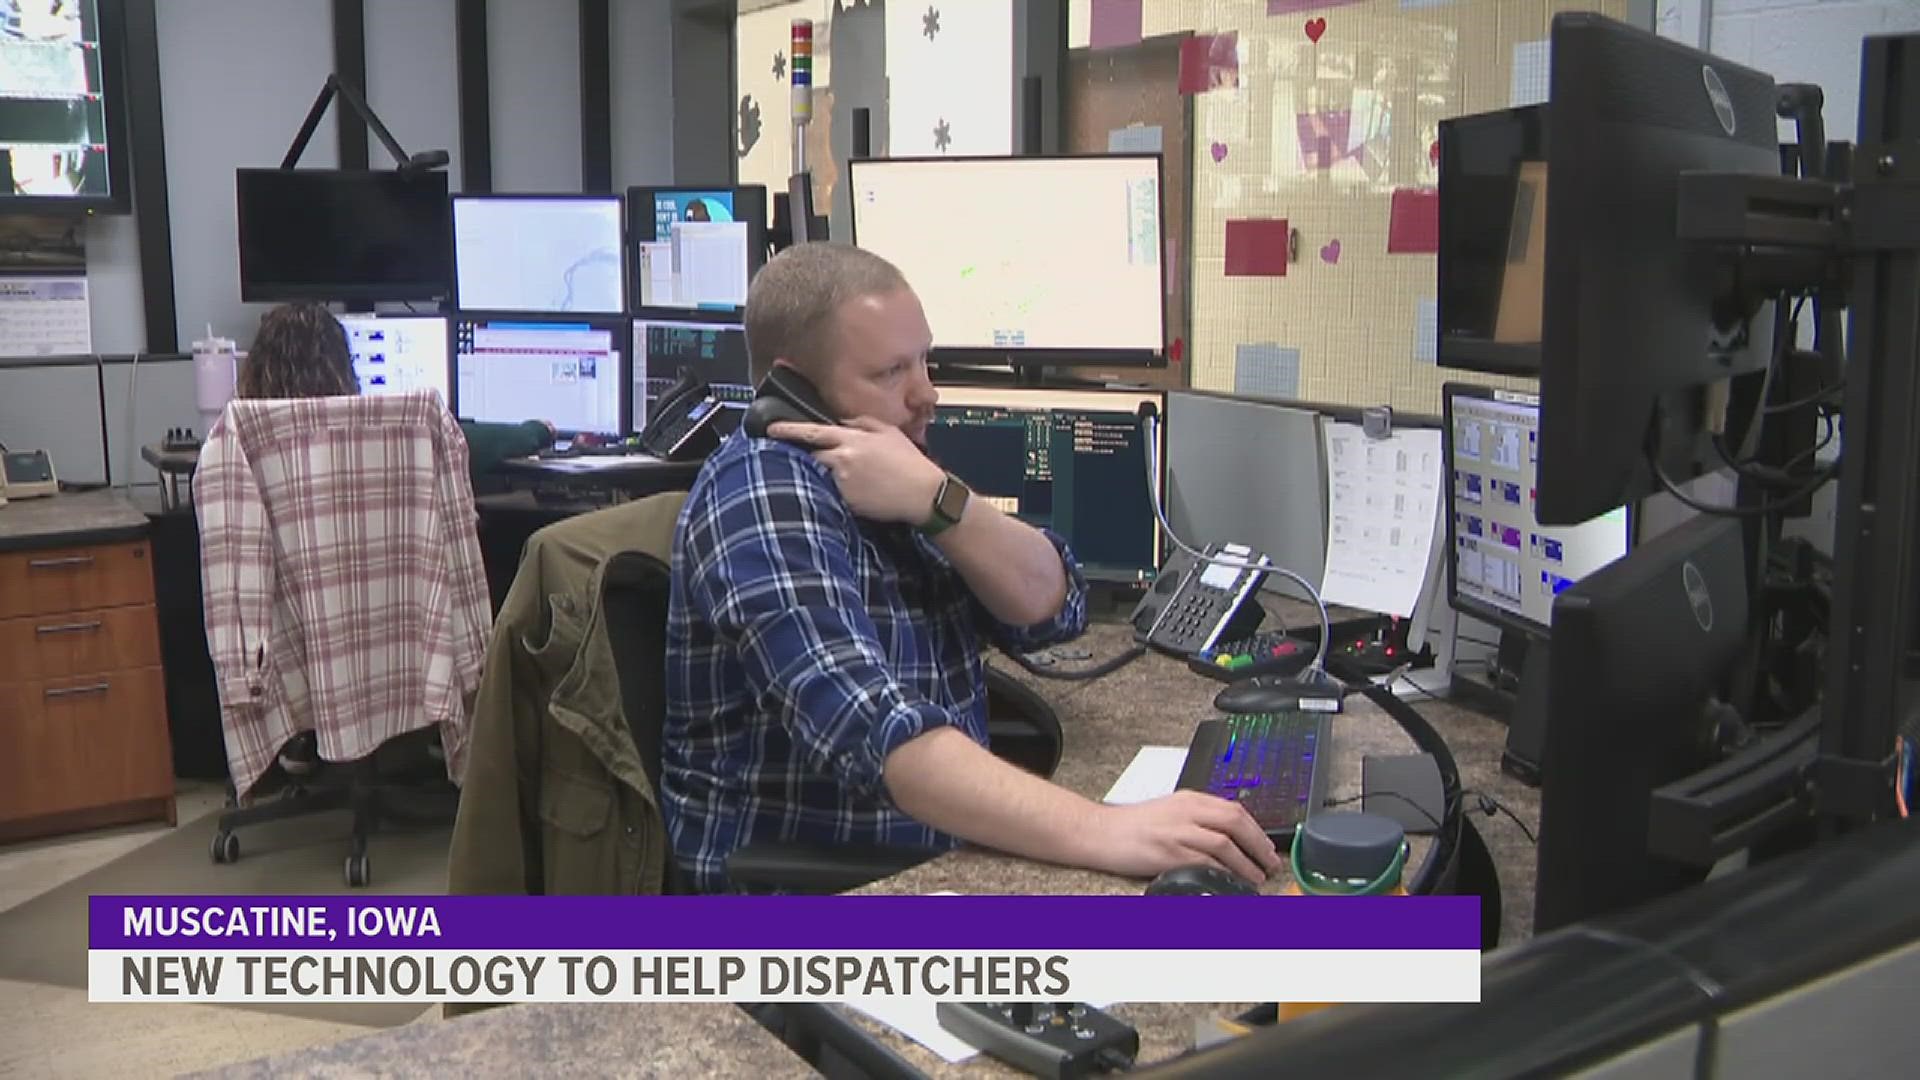 Muscatine County is the third county in Iowa to implement a feature that lets you live stream to dispatchers — helping them better understand situations.